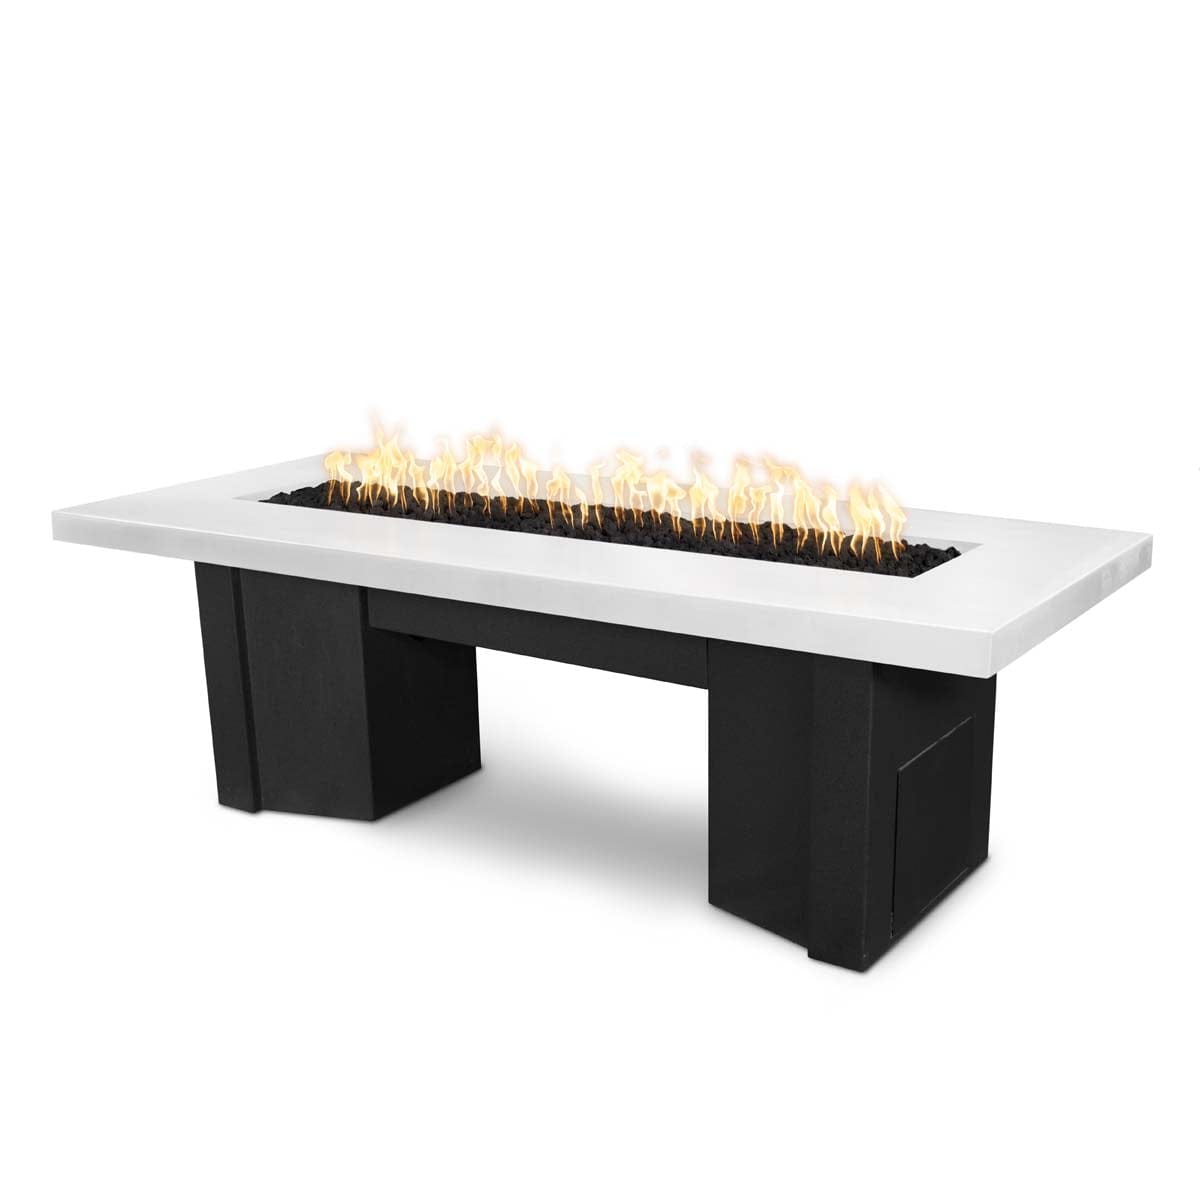 The Outdoor Plus Fire Features Limestone (-LIM) / Black Powder Coated Steel (-BLK) The Outdoor Plus 78&quot; Alameda Fire Table Smooth Concrete in Liquid Propane - Match Lit with Flame Sense System / OPT-ALMGFRC78FSML-LP